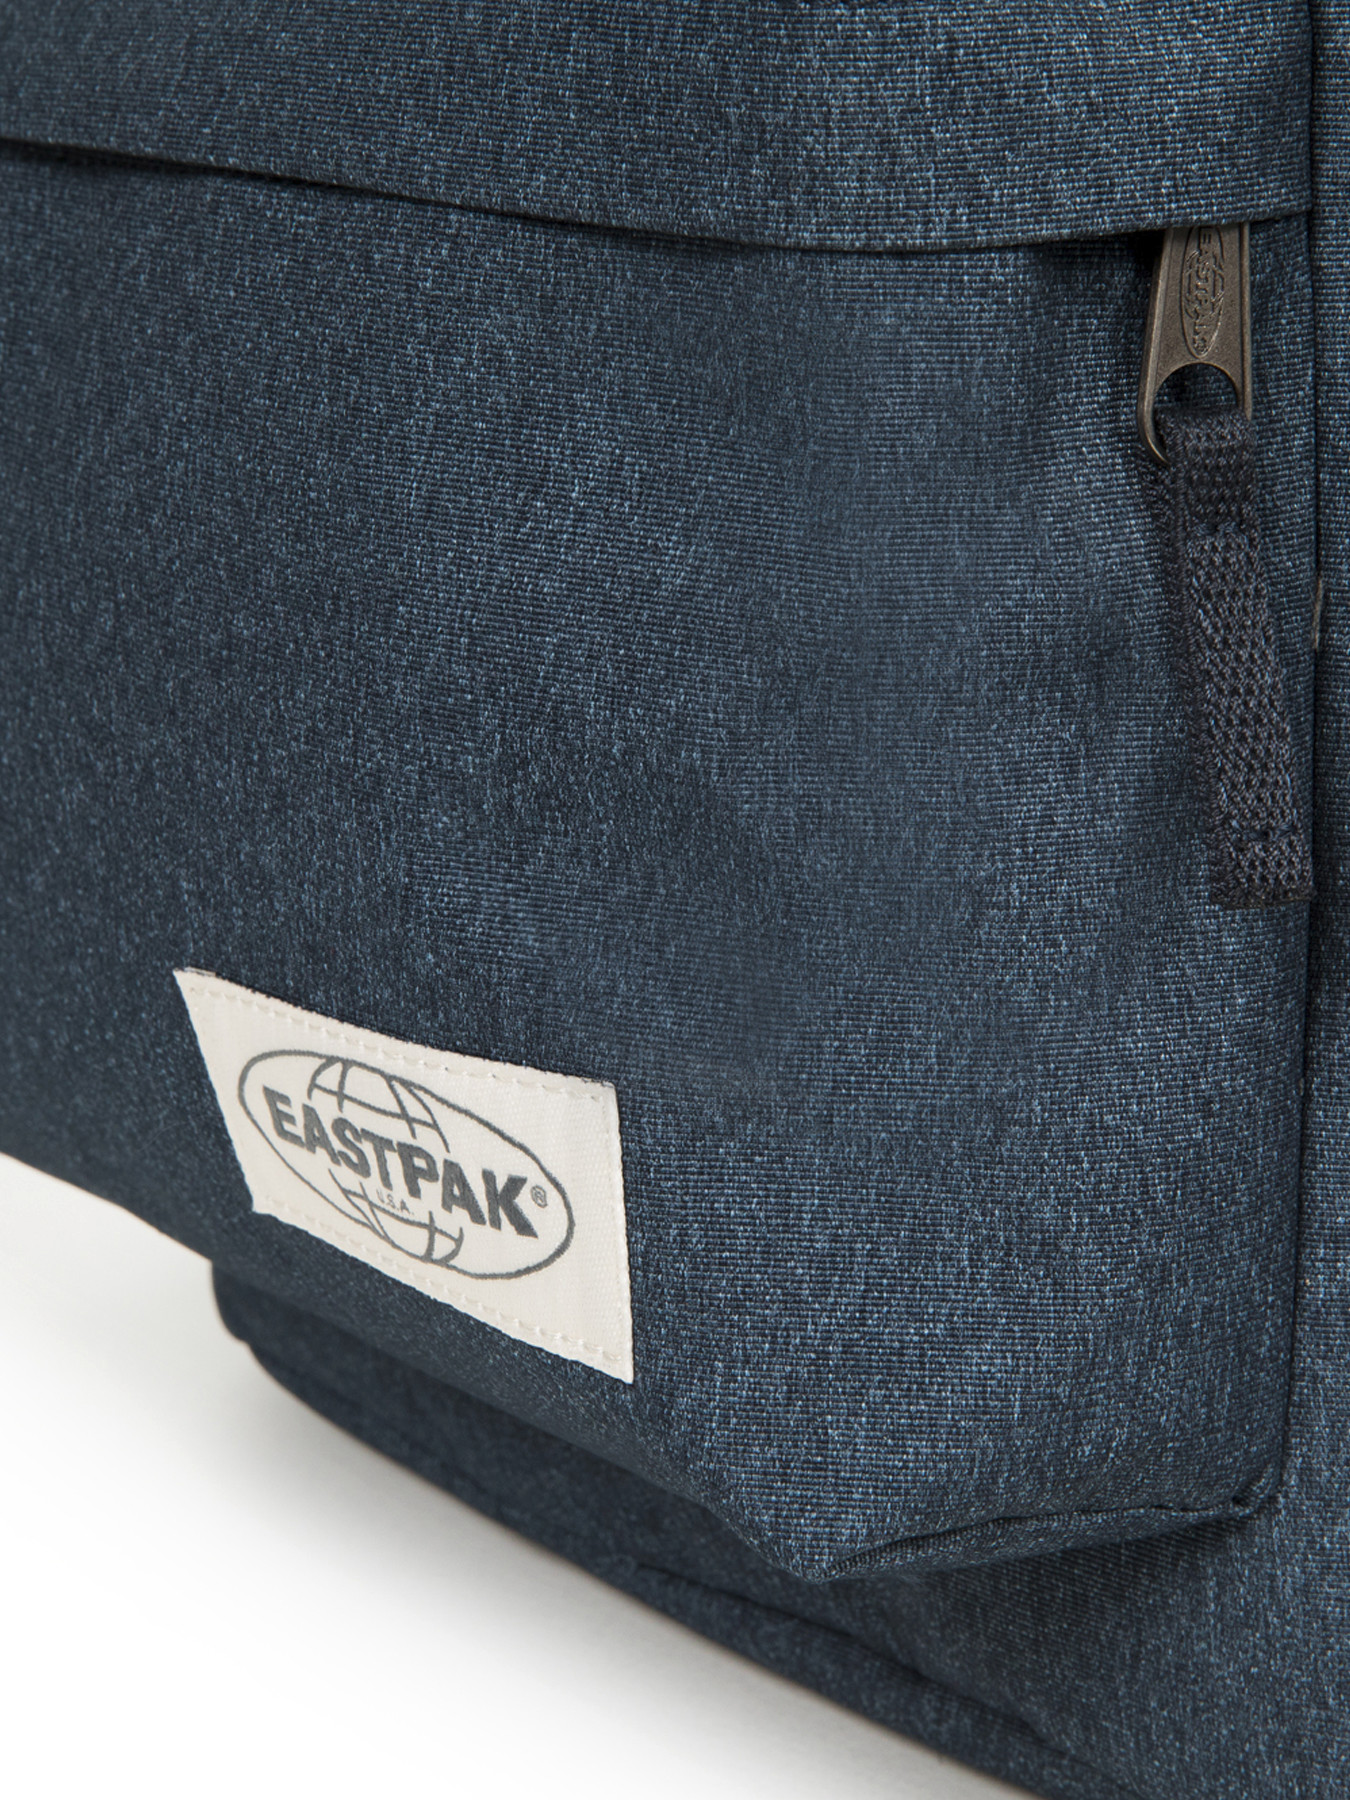 Eastpak Out Of Office Commuter Bag | Hand Luggage | Fenwick